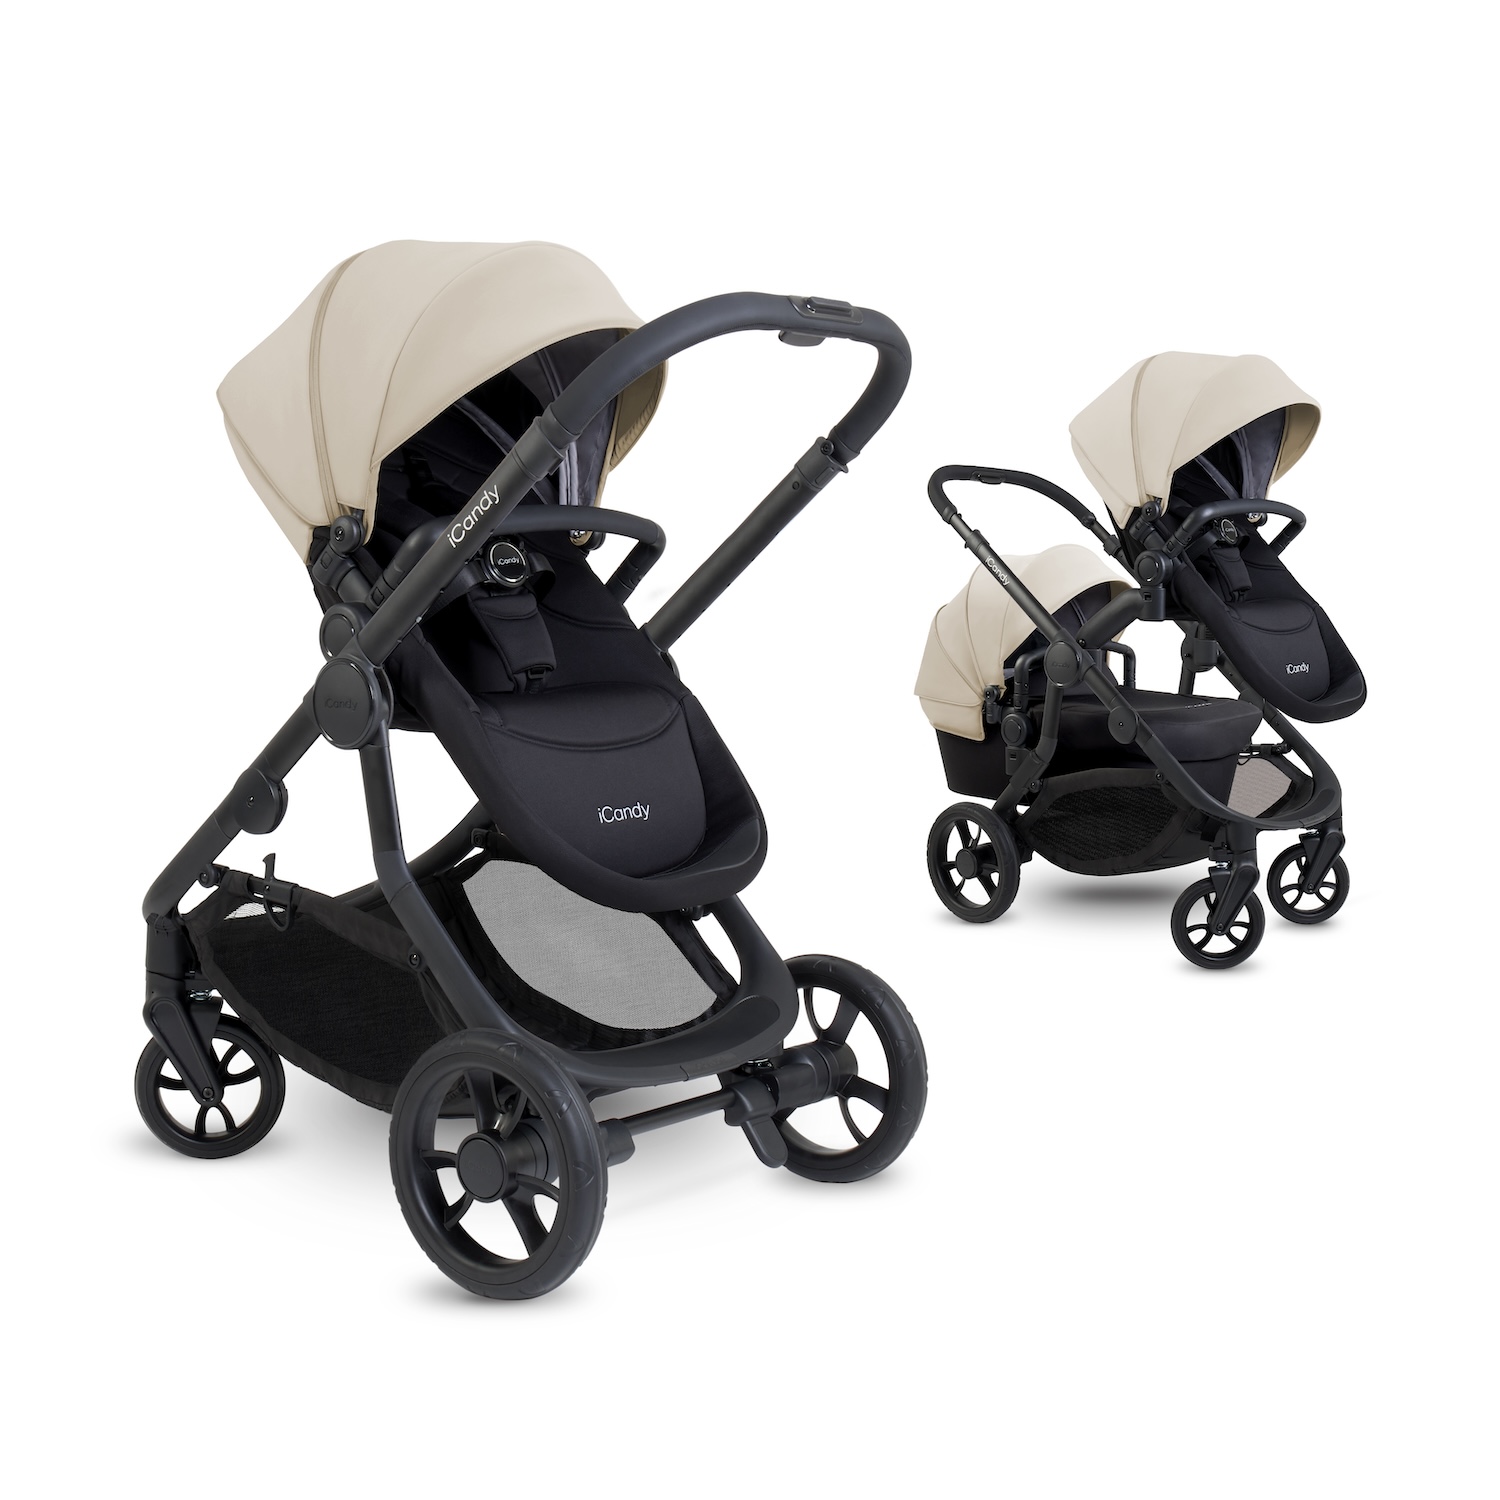 iCandy Orange 4 Pushchair Bundle Latte from Olivers Baby Care